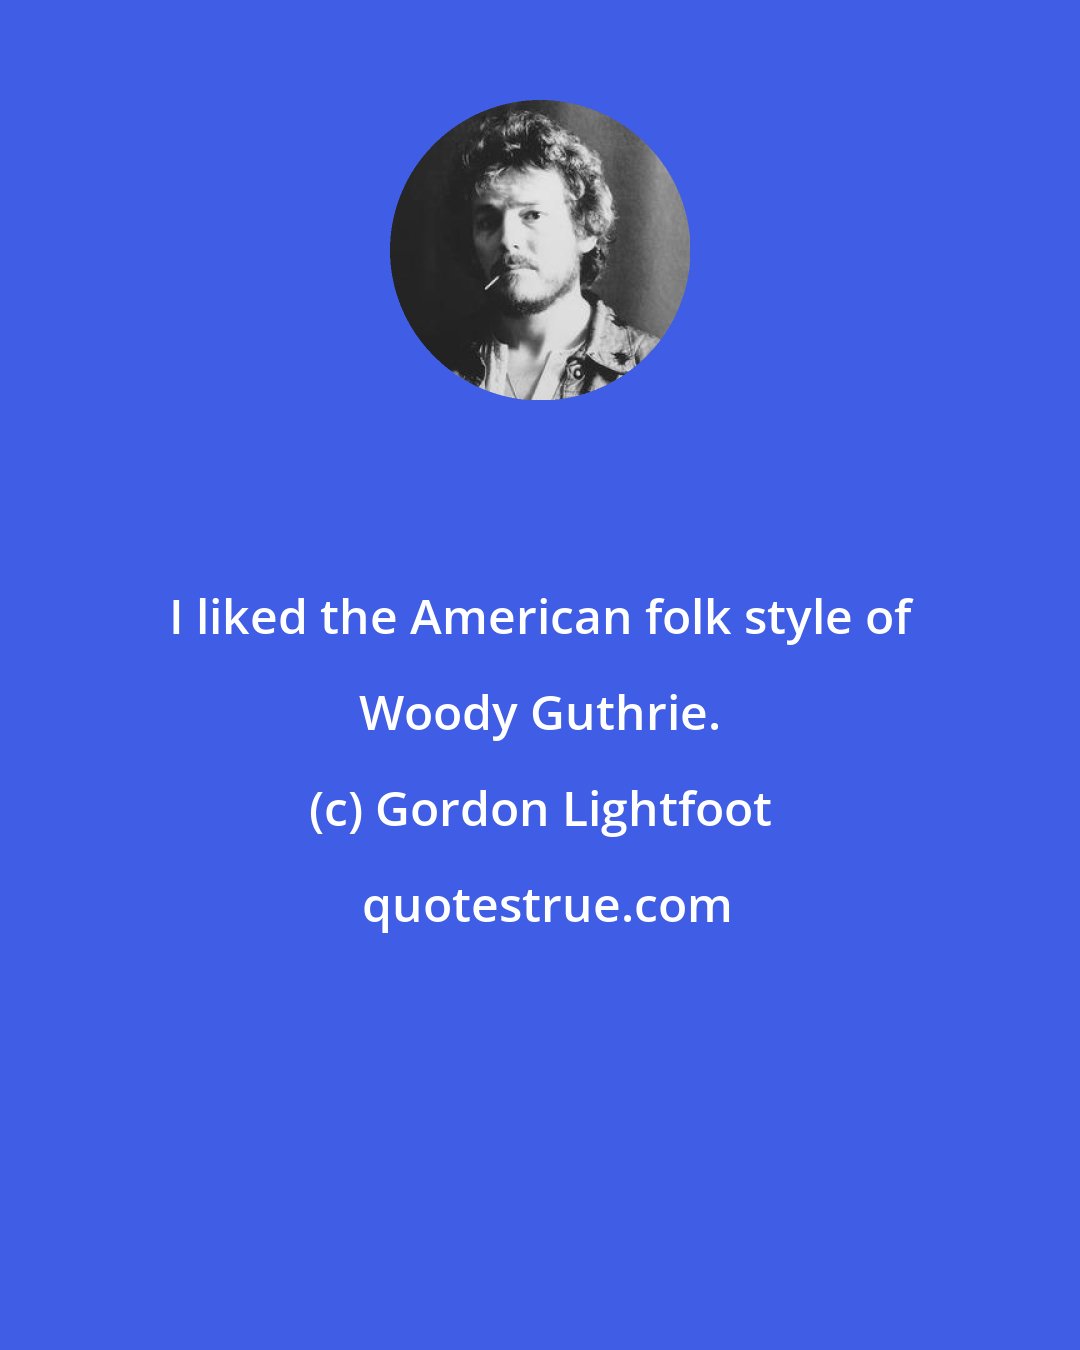 Gordon Lightfoot: I liked the American folk style of Woody Guthrie.